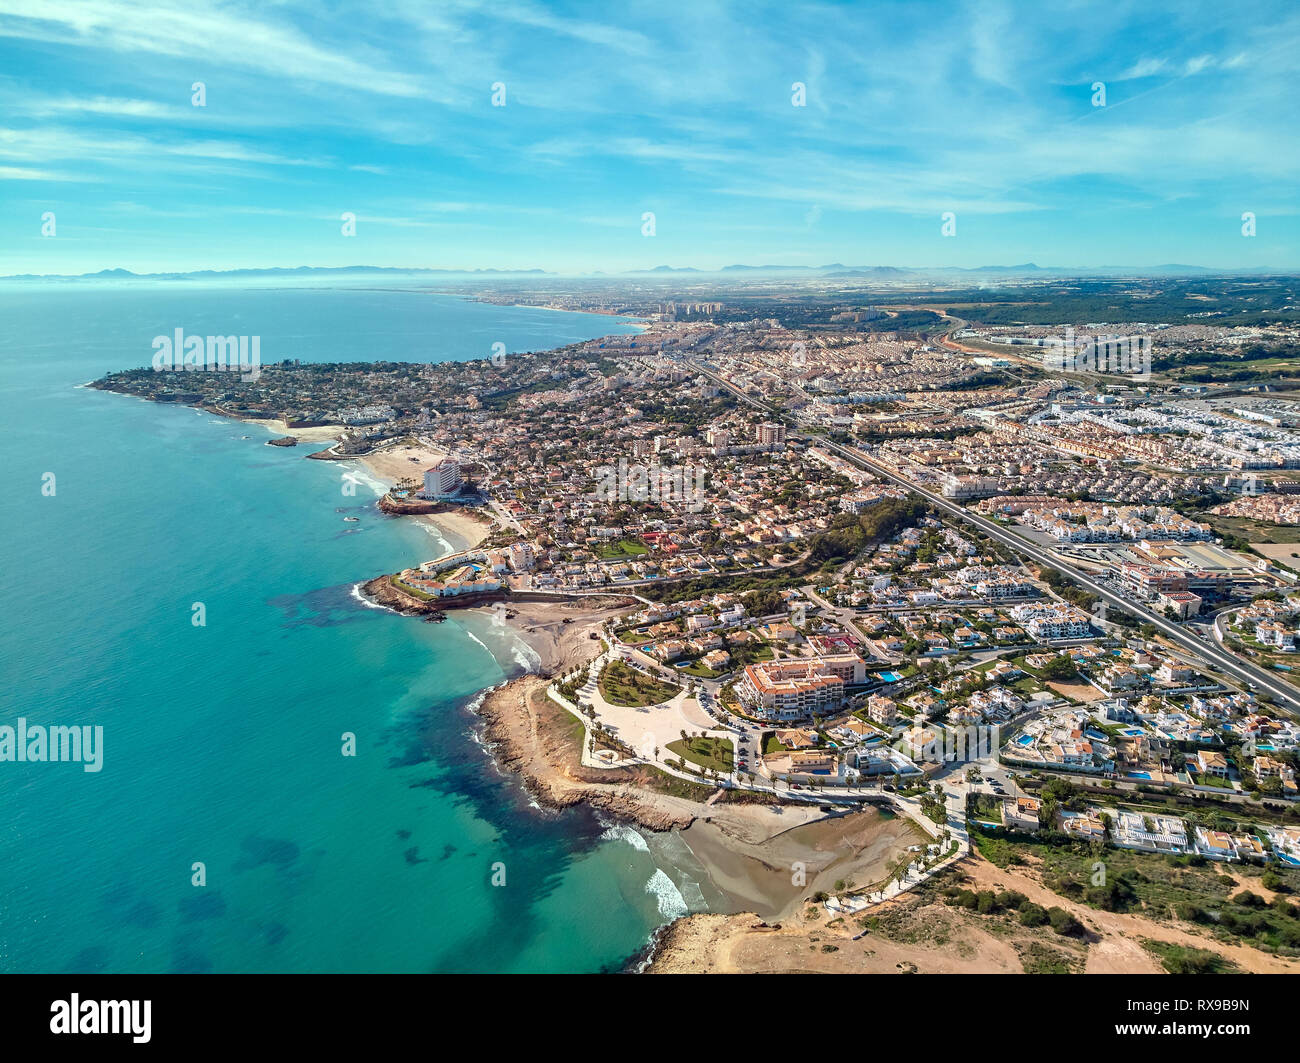 Costa Blanca view from above, drone point of view aerial photography. Turquoise green water rocky coastline, sandy beaches. Cityscape Torrevieja Spain Stock Photo